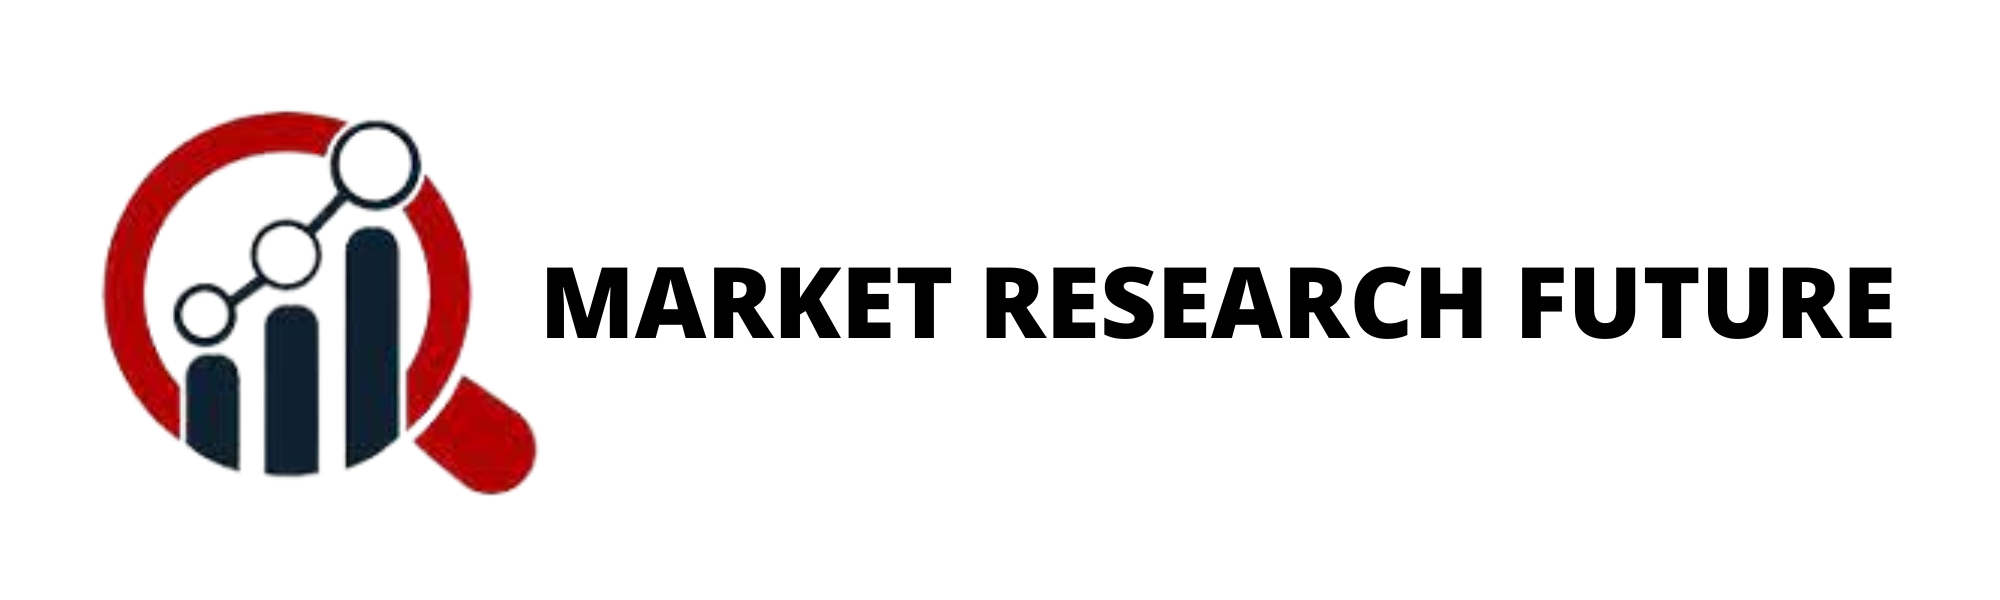 Forklift Trucks Market Industry Insight And Key Players With...